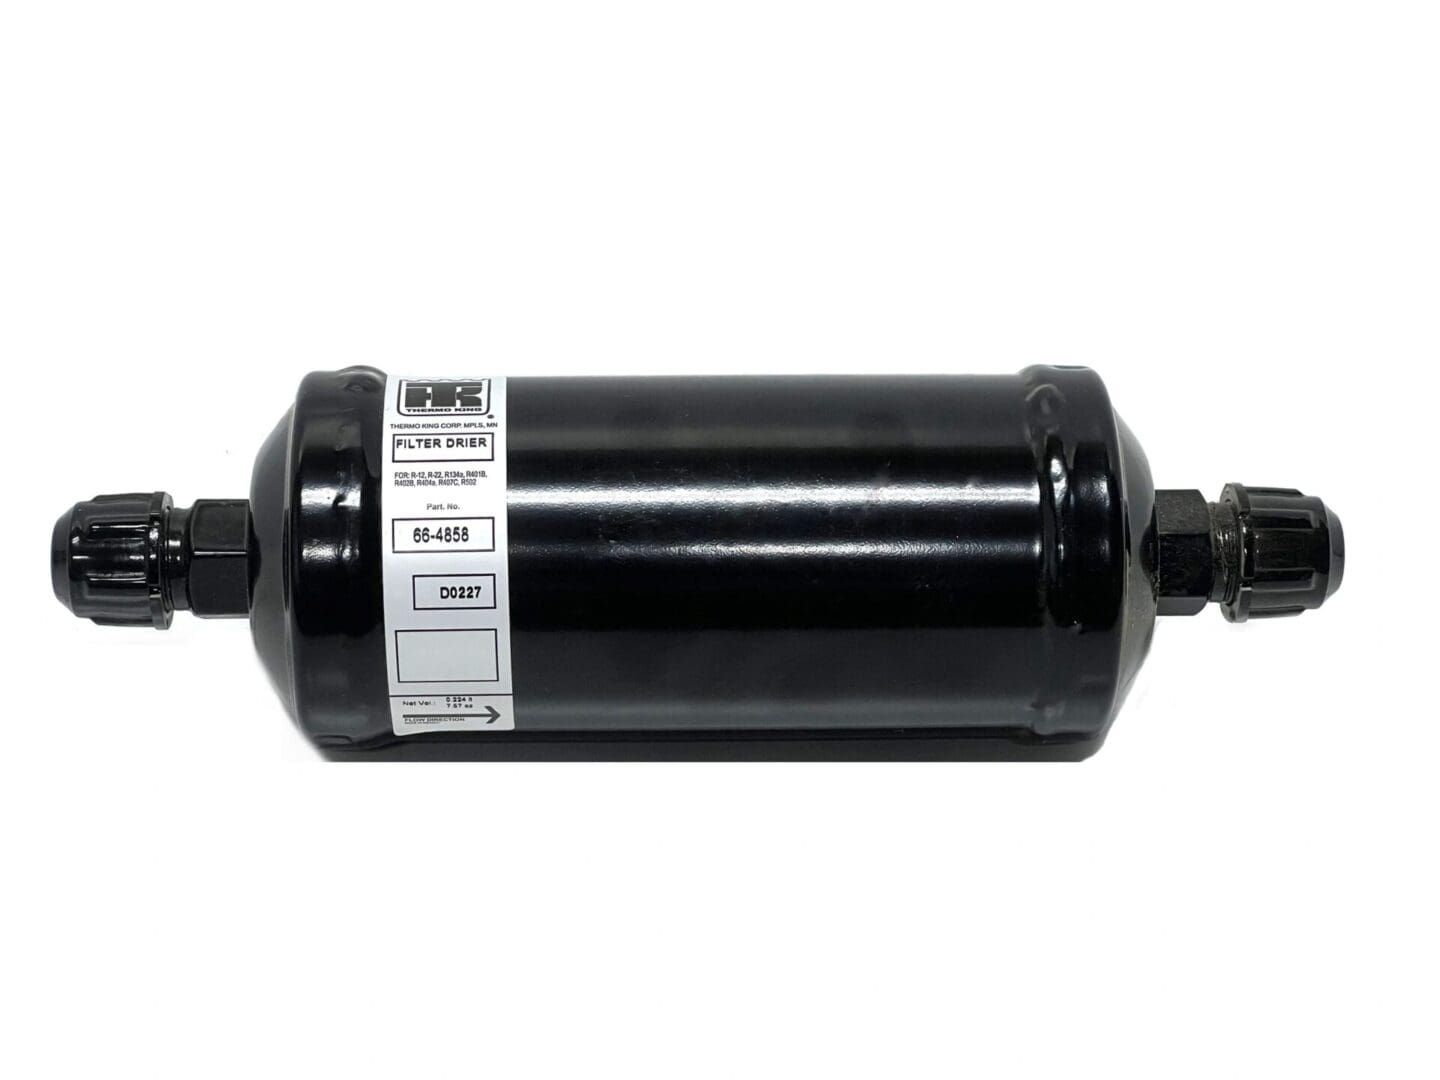 A black cylinder with a white label on it.